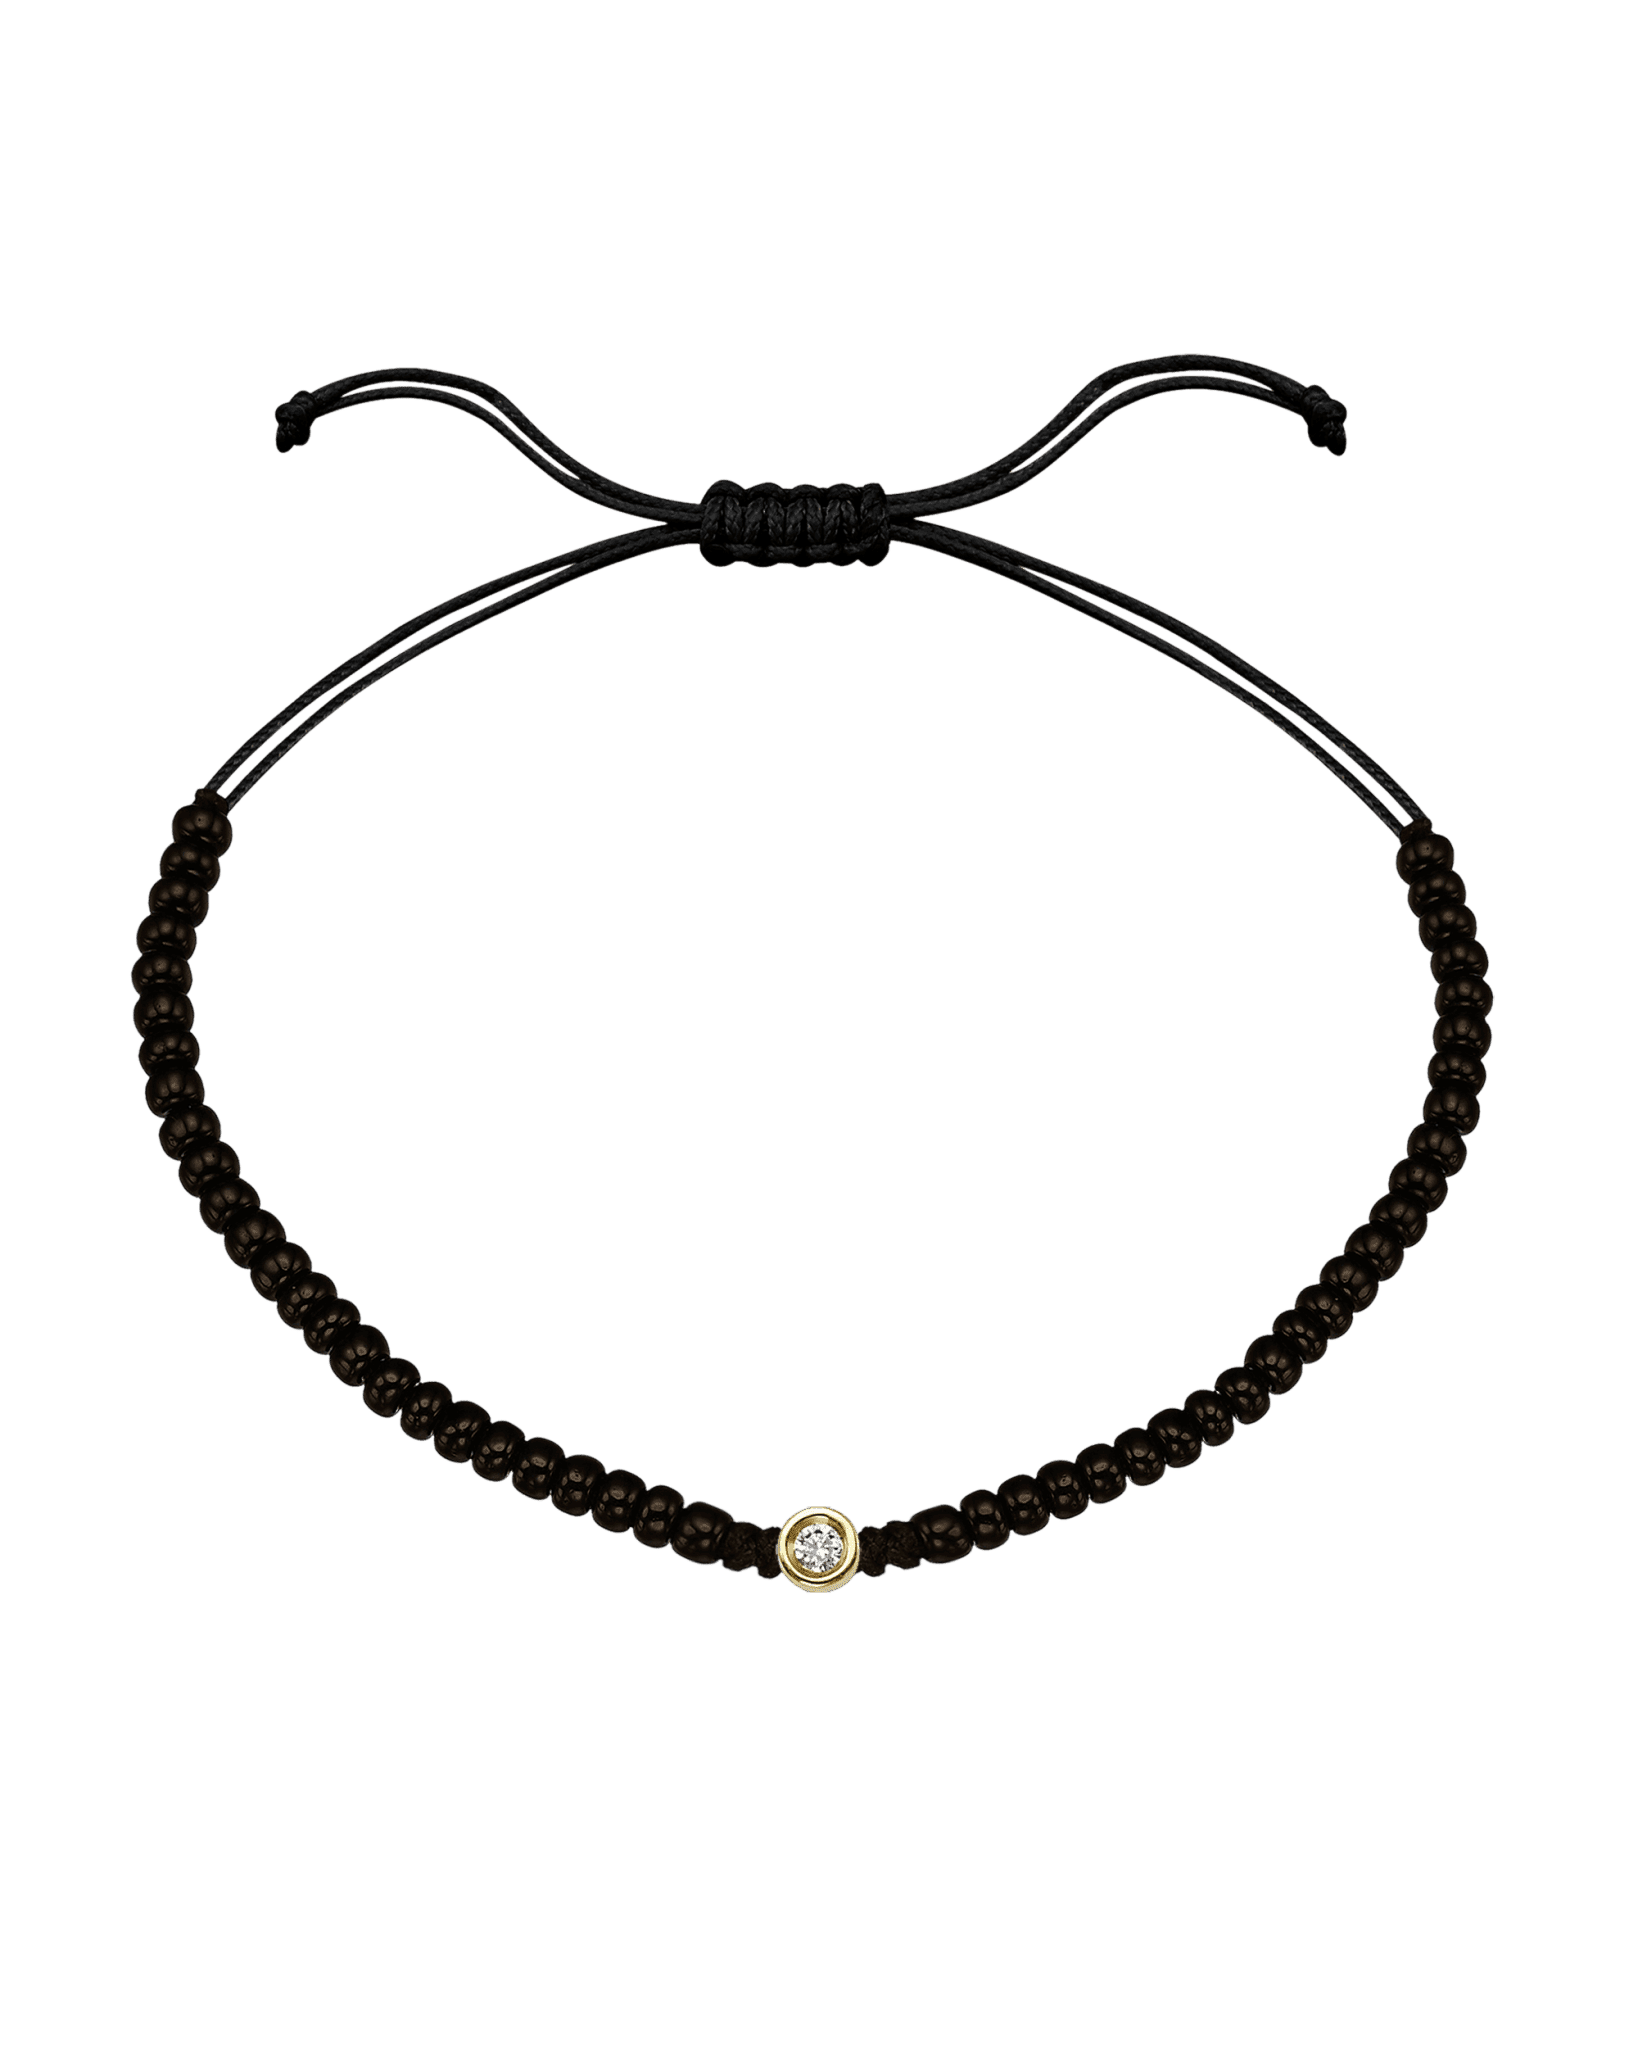 Le String of Love Onyx Noir - Or Jaune 14 carats Bracelets magal-dev Small: 0.03 carats 